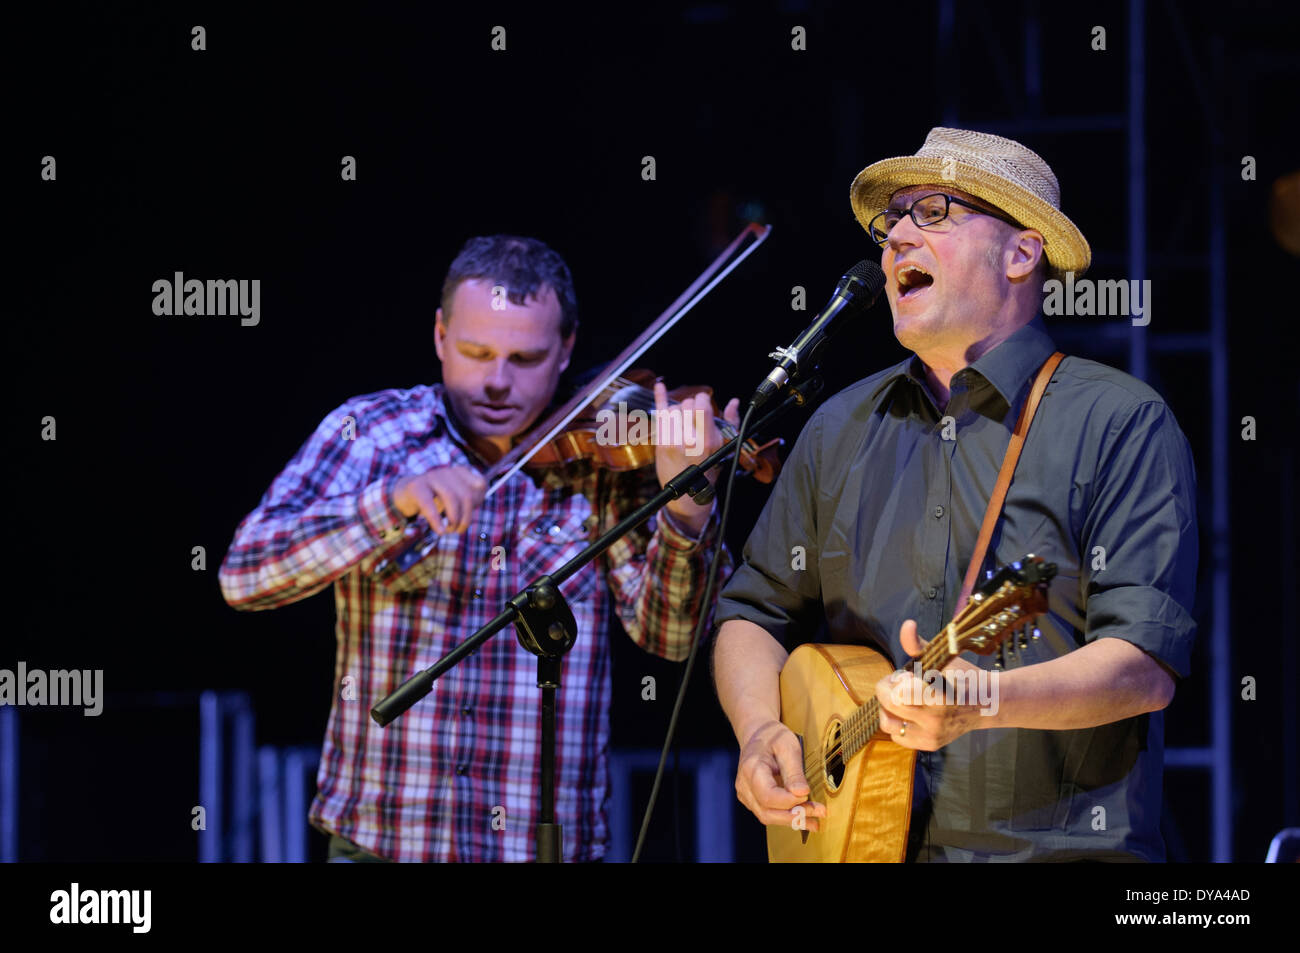 Adrian Edmondson and Andy Dinan of The Bad Shepherds playing in concert Stock Photo